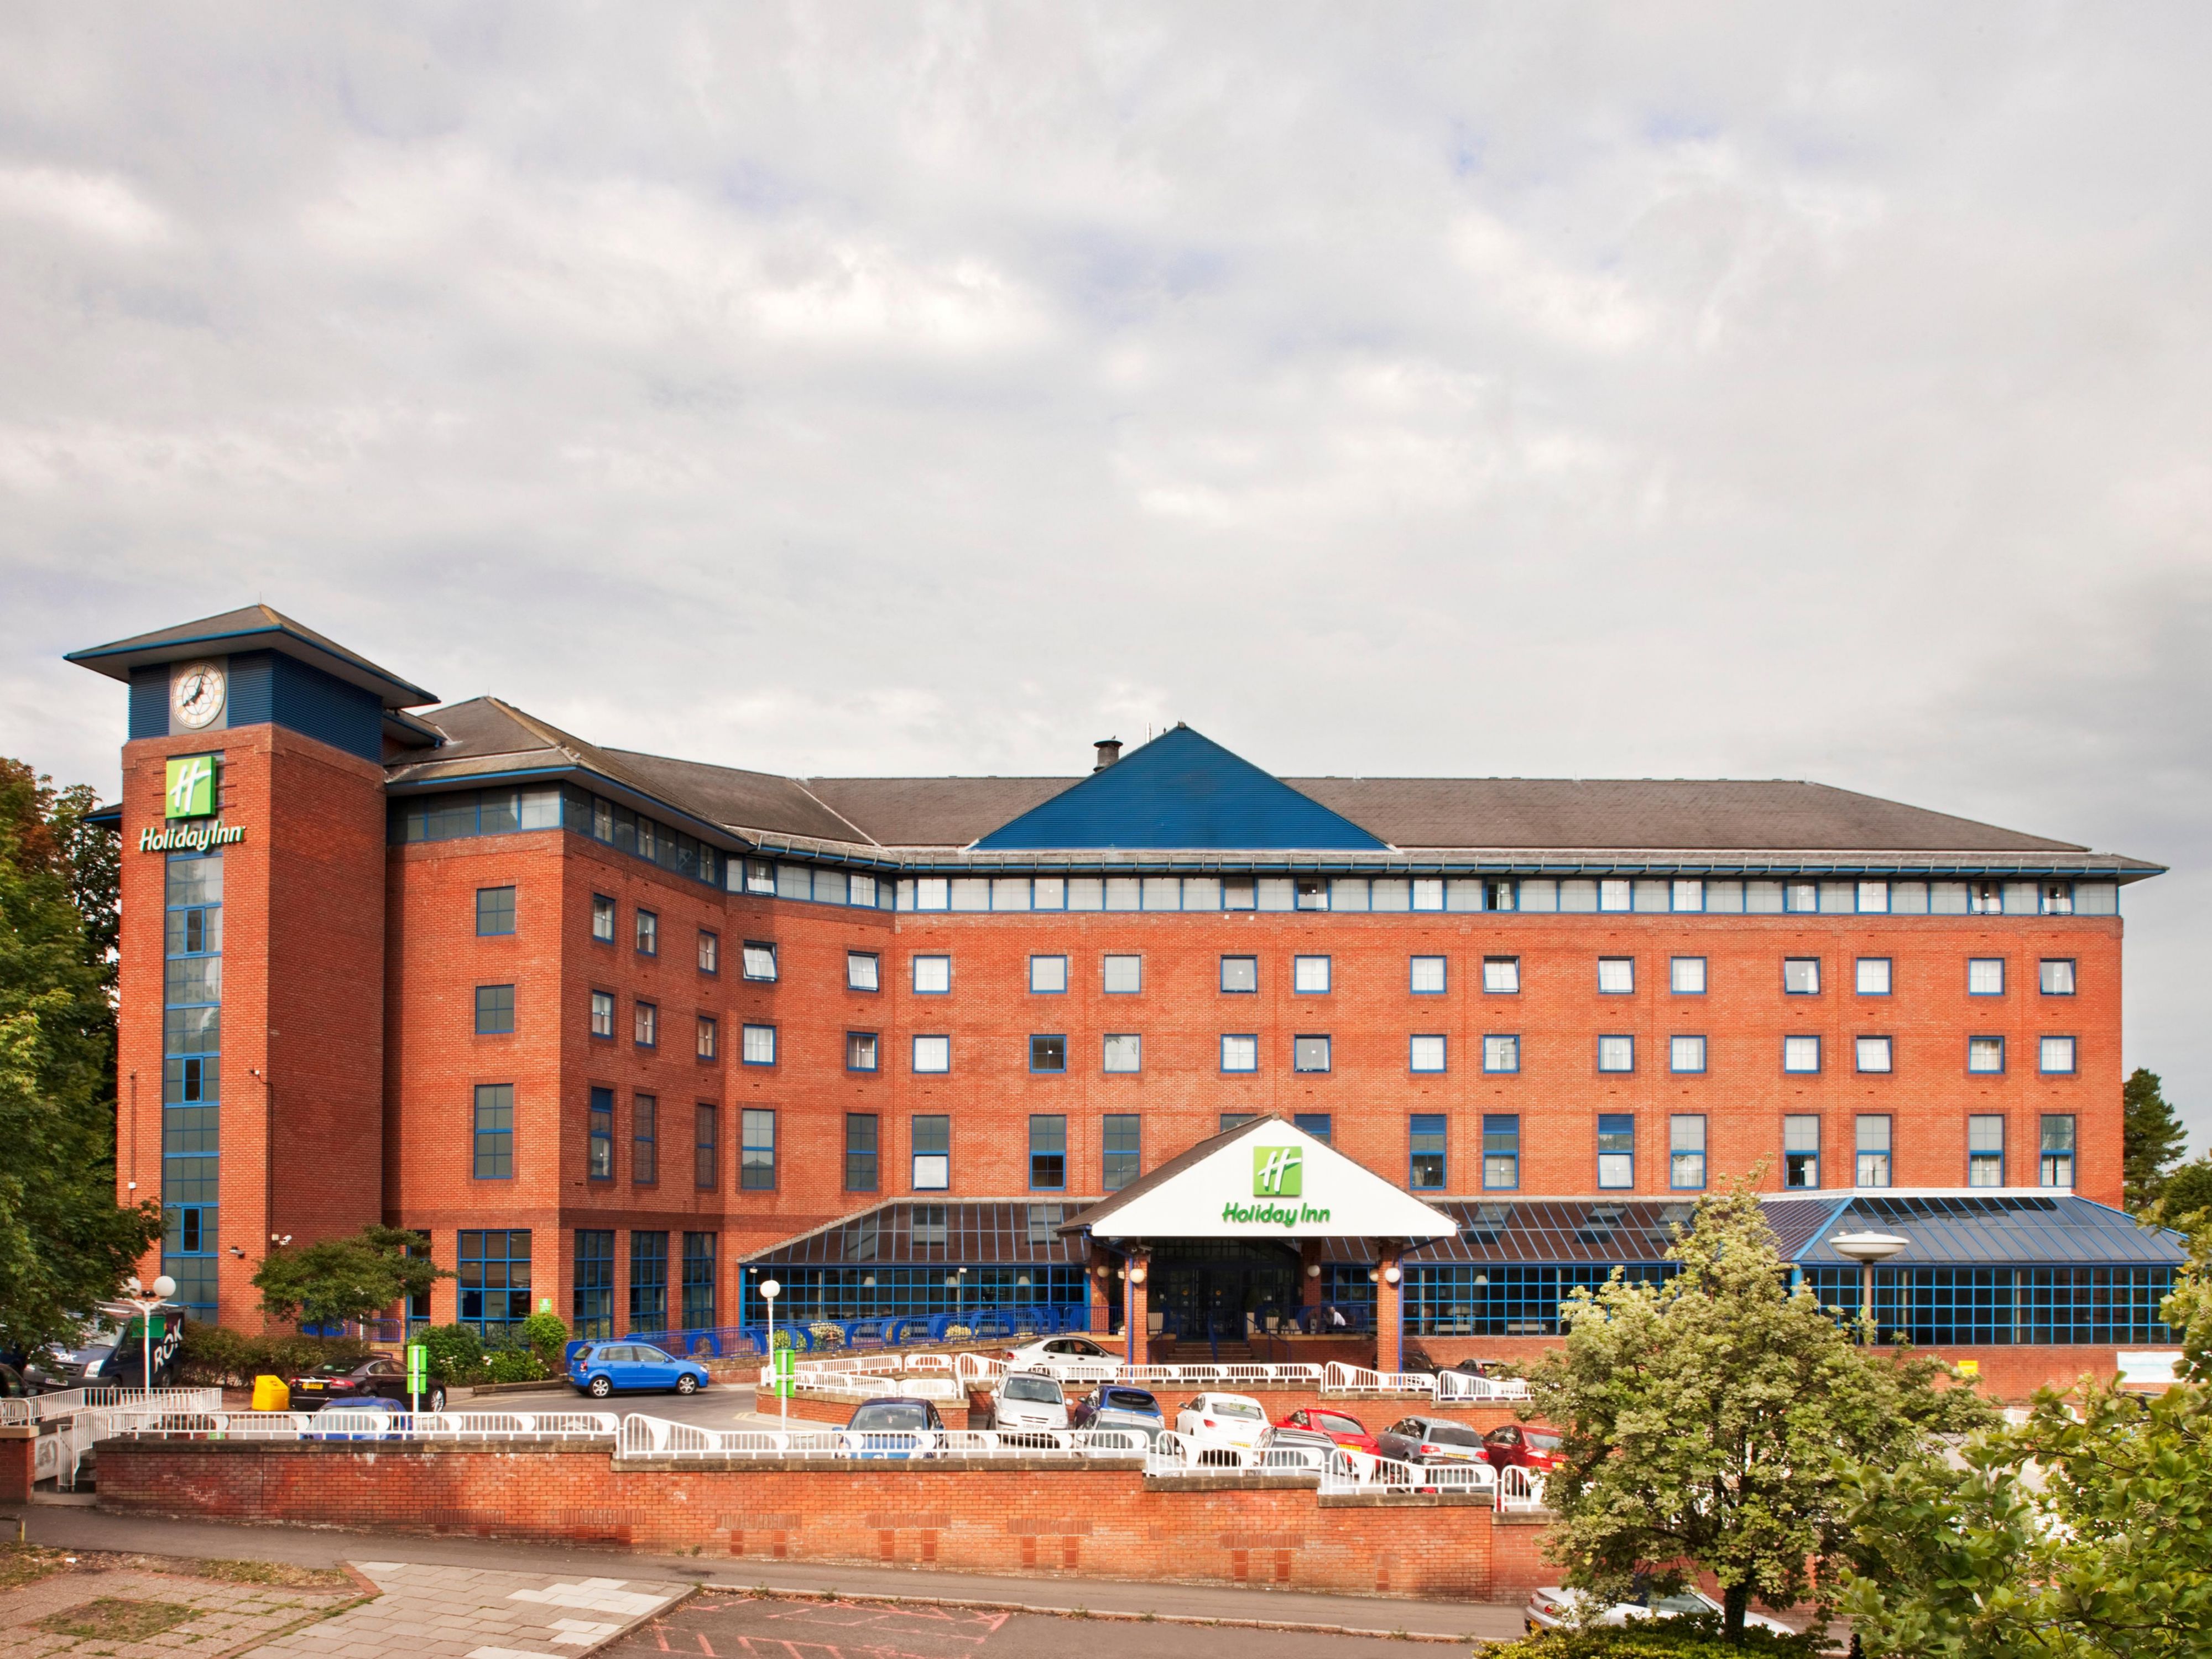 Just click on the link for a chance to visit Holiday Inn London Sutton virtually with a fully interactive, virtual tour. Move through the hotel exploring the open lobby, restaurant, meeting space, and bedrooms.